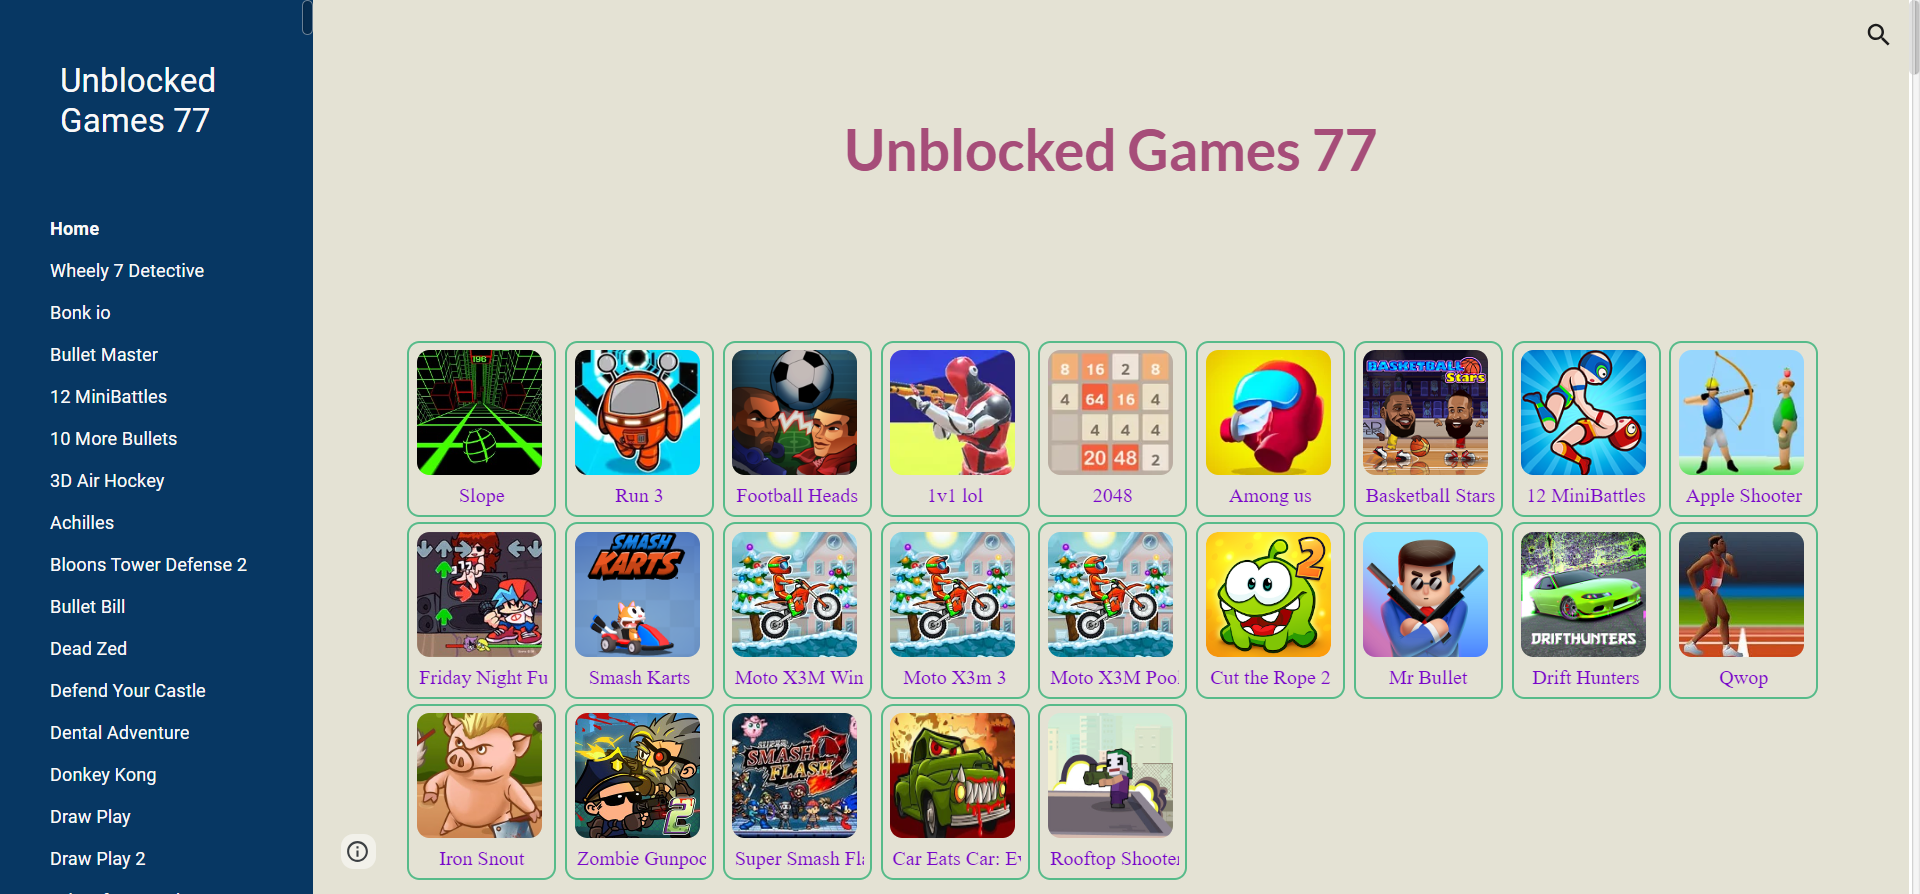 Unblocked Games 77 - Play Unblocked Games 77 at School